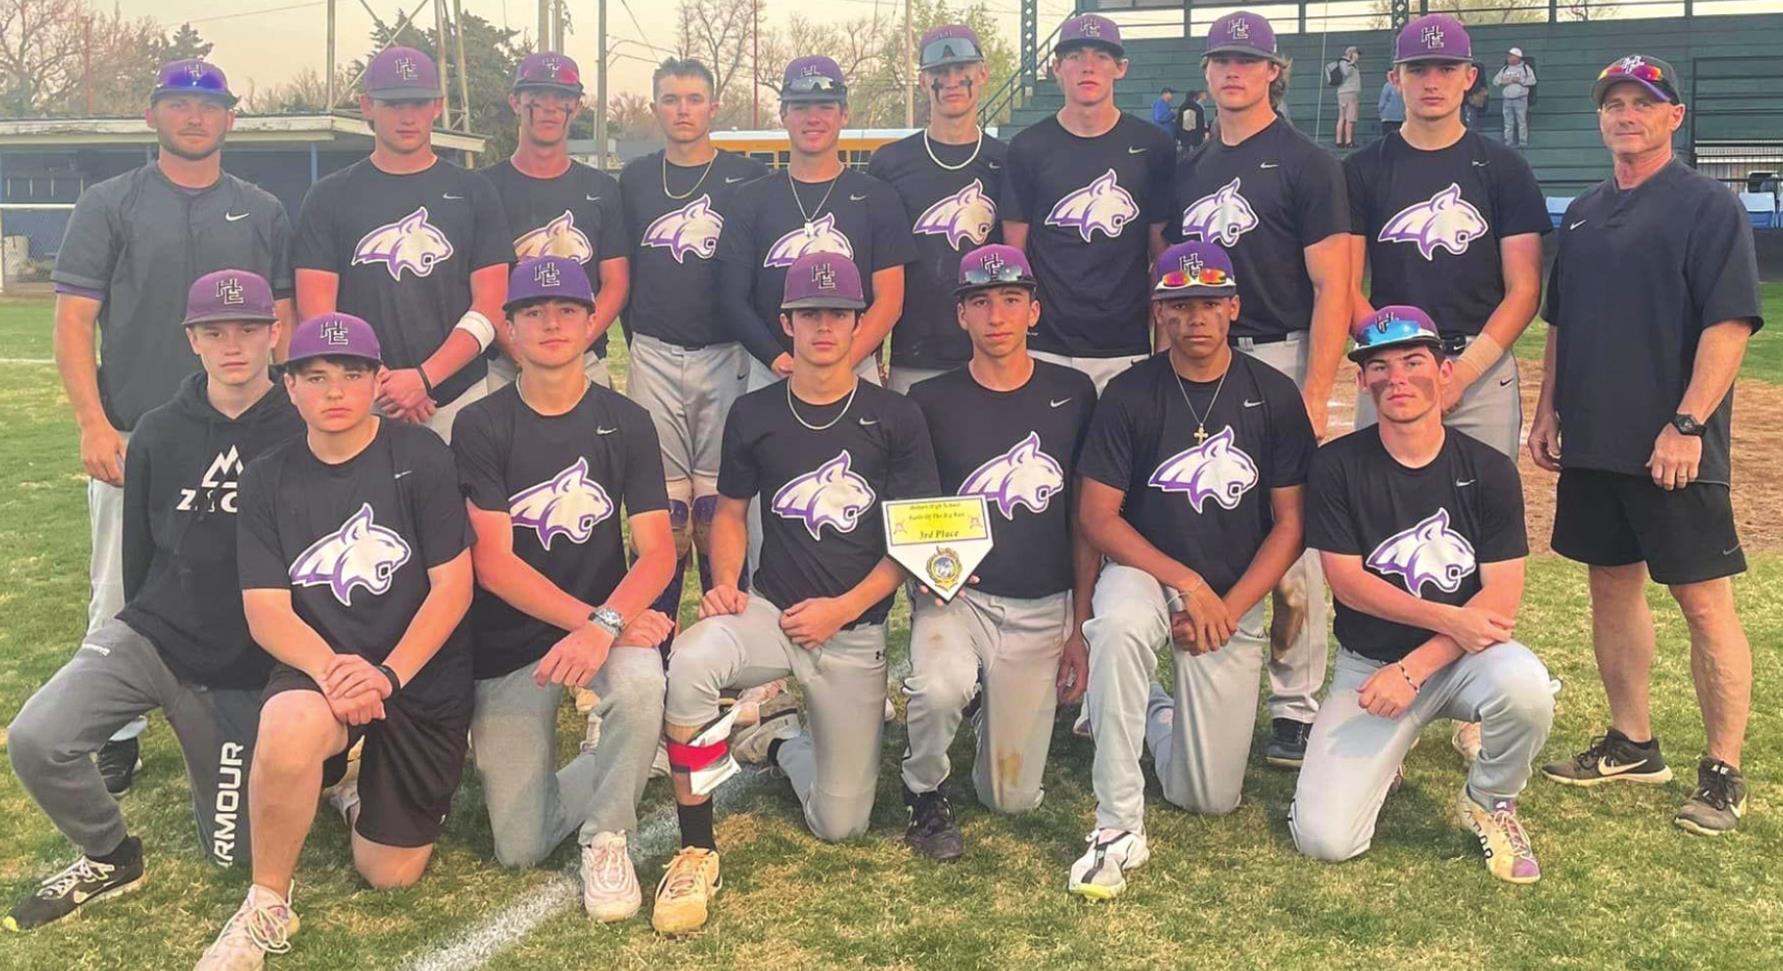 The Hydro-Eakly baseball team finishes third at the Hobart tournament this past weekend. Provided